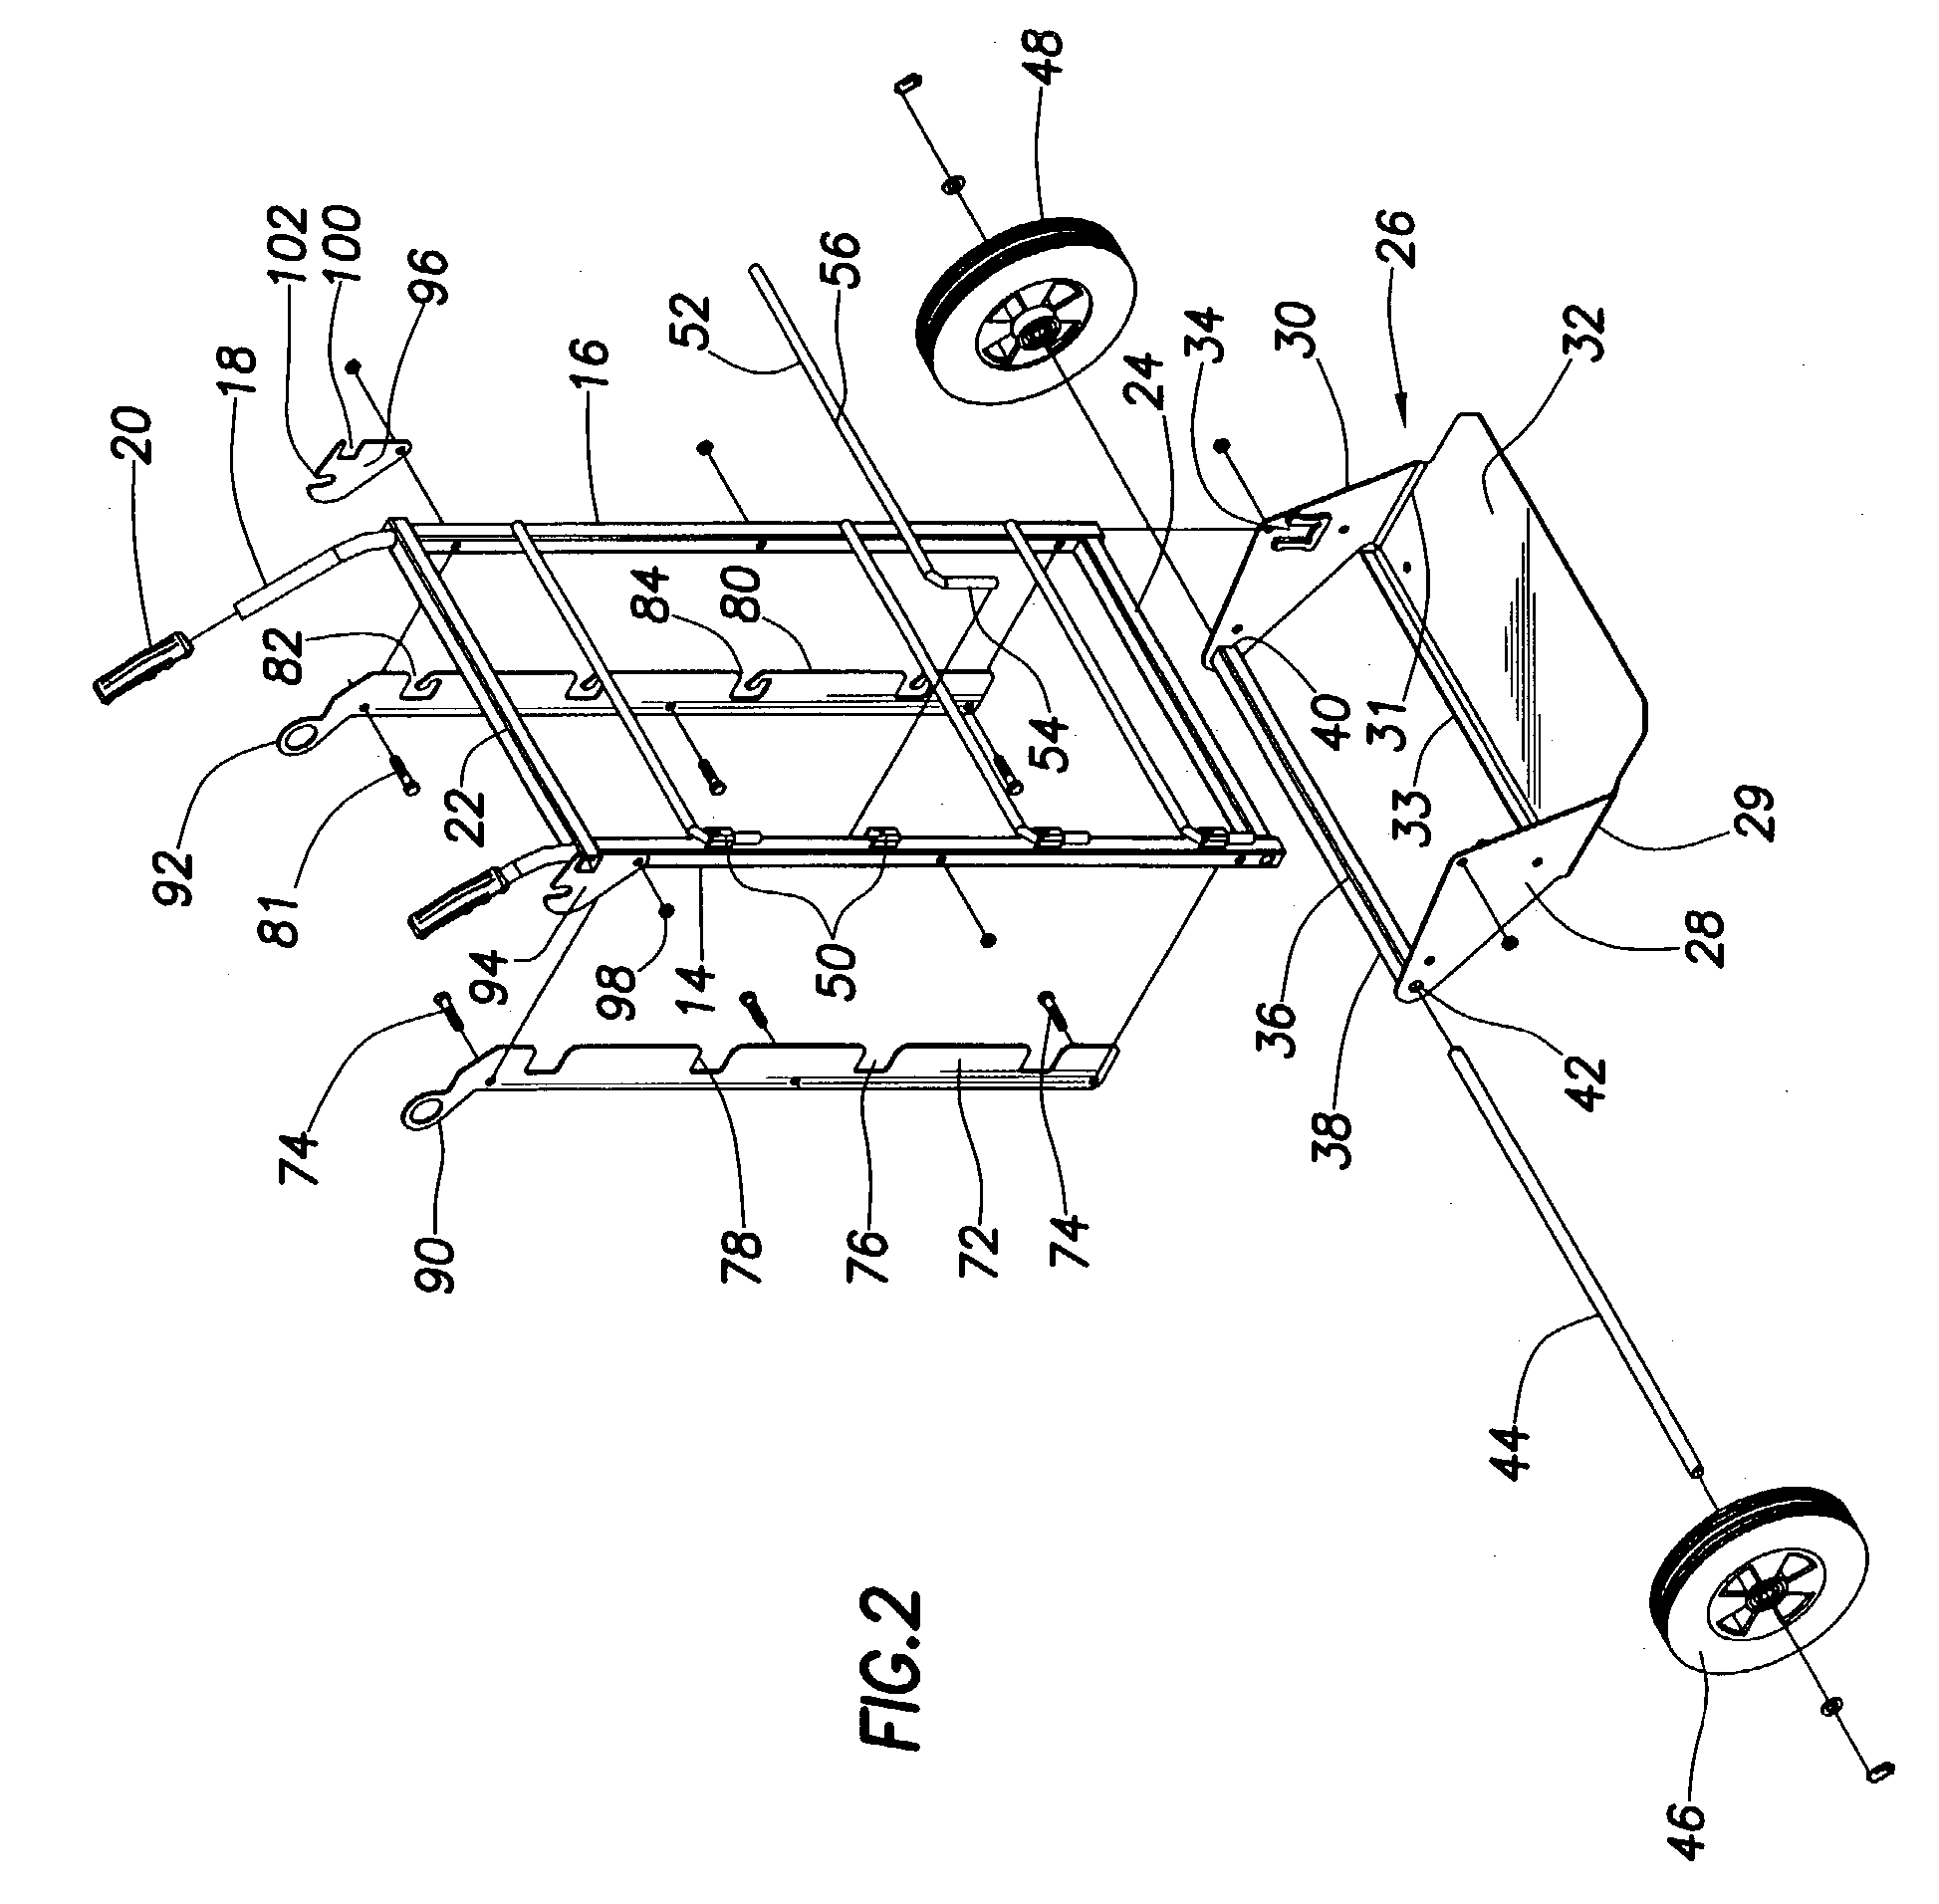 Reel support and dispensing cart